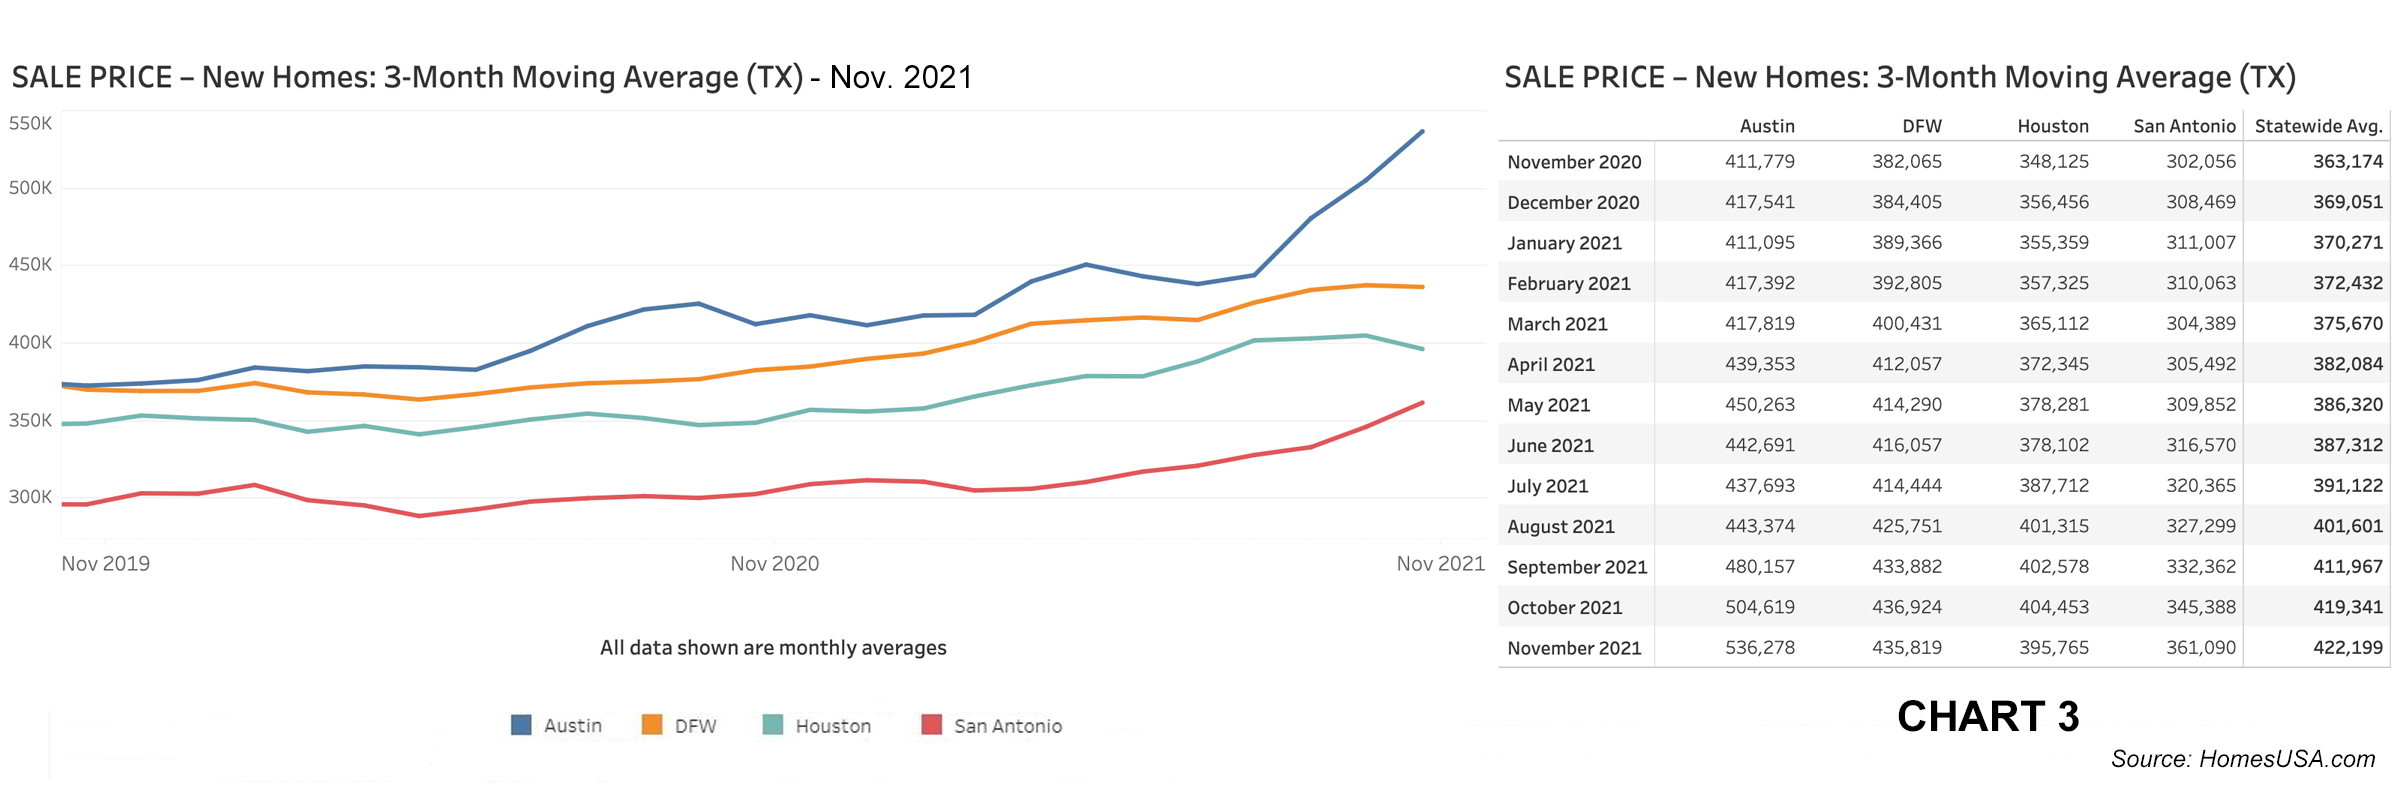 Chart 3: Texas New Home Sales Prices – Nov. 2021